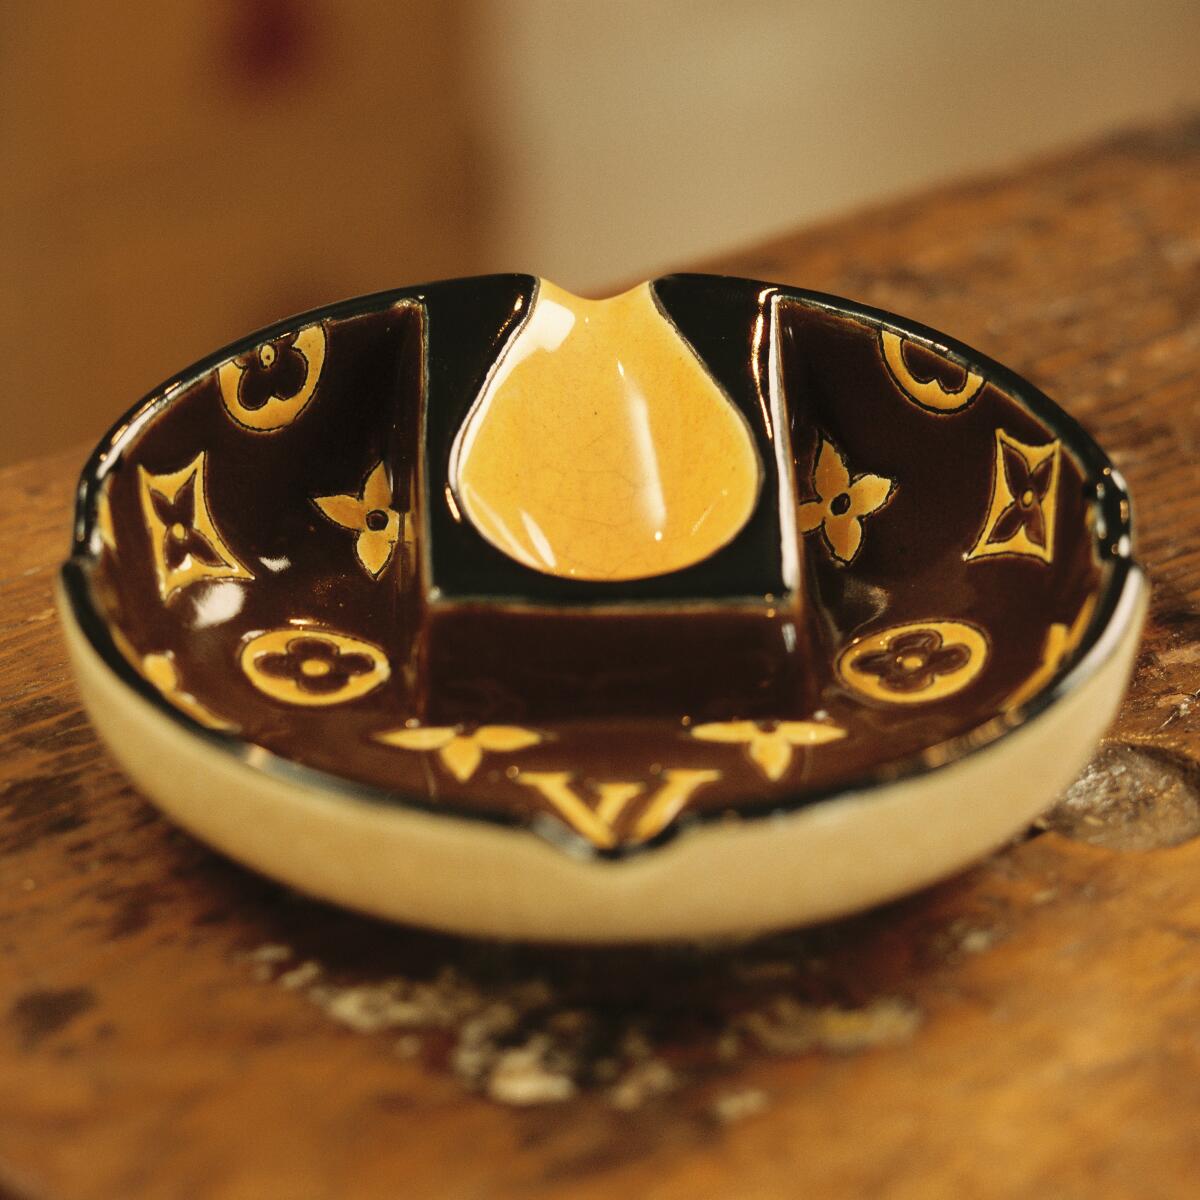 A bowl-shaped ashtray with the Louis Vuitton logo.